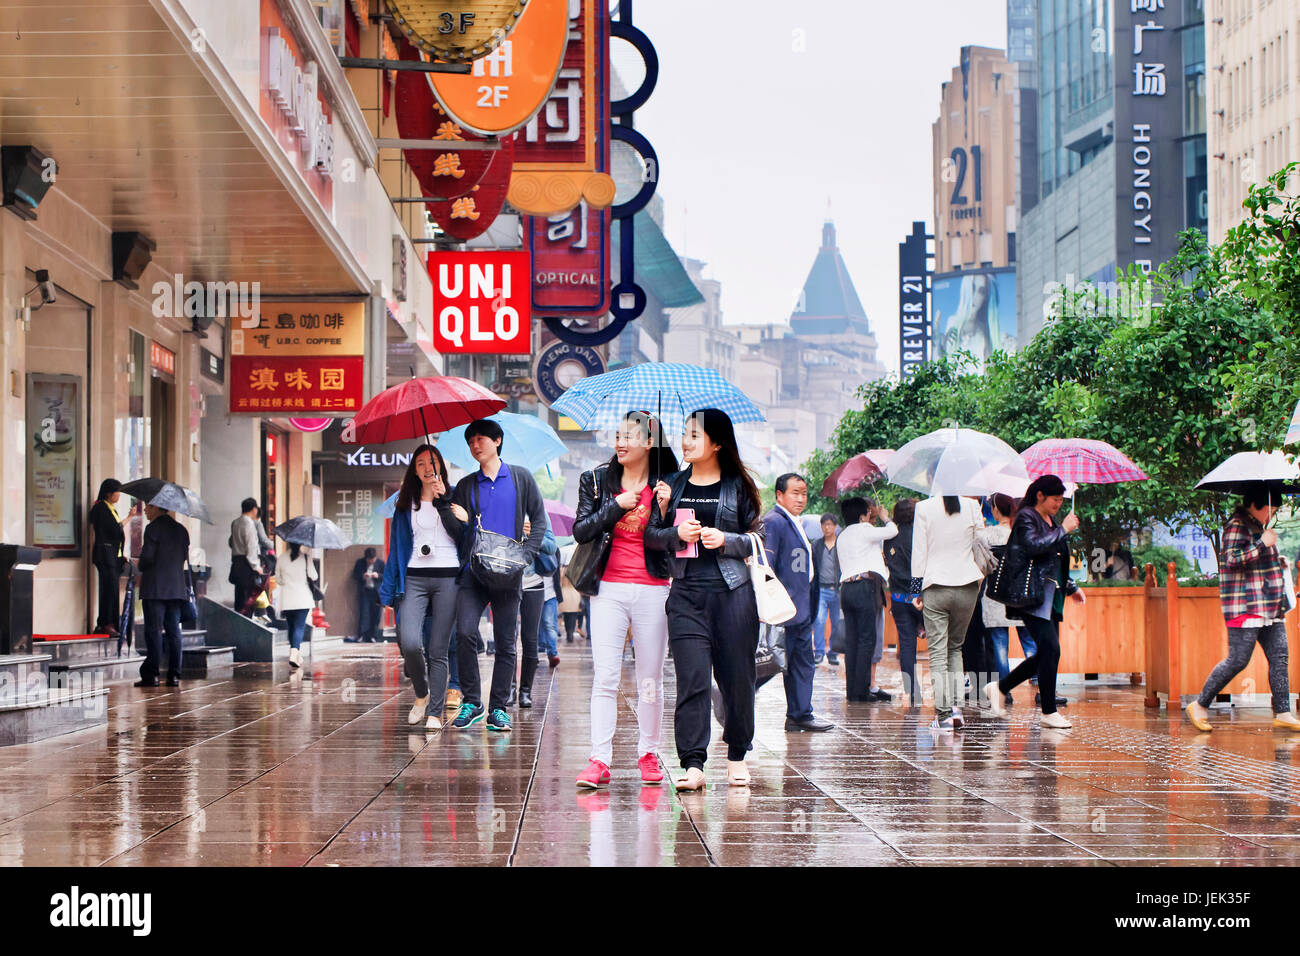 Shoppers with umbrella in wet Nanjing East Road. Shanghai has a humid subtropical climate, its summer is very warm and humid. Stock Photo